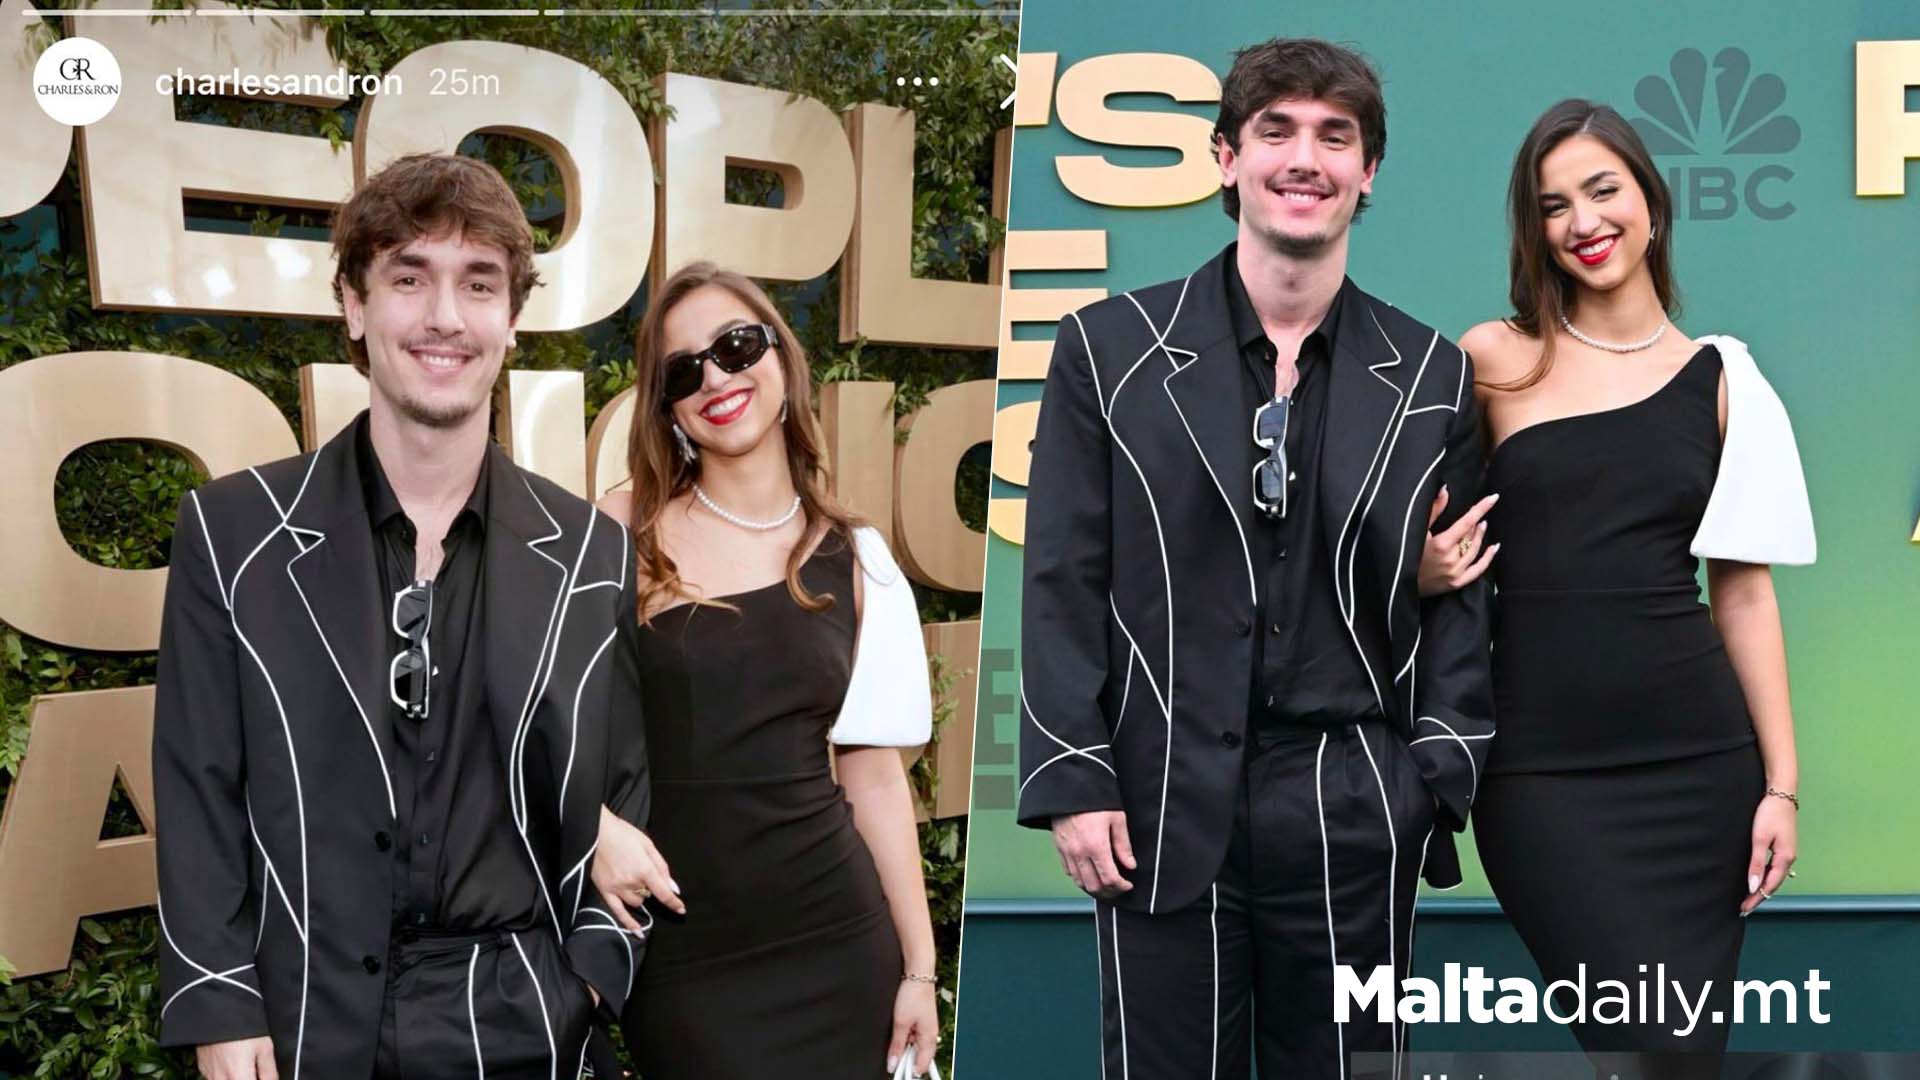 Influencer Bryce Hall Wears Charles&Ron To People's Choice Awards